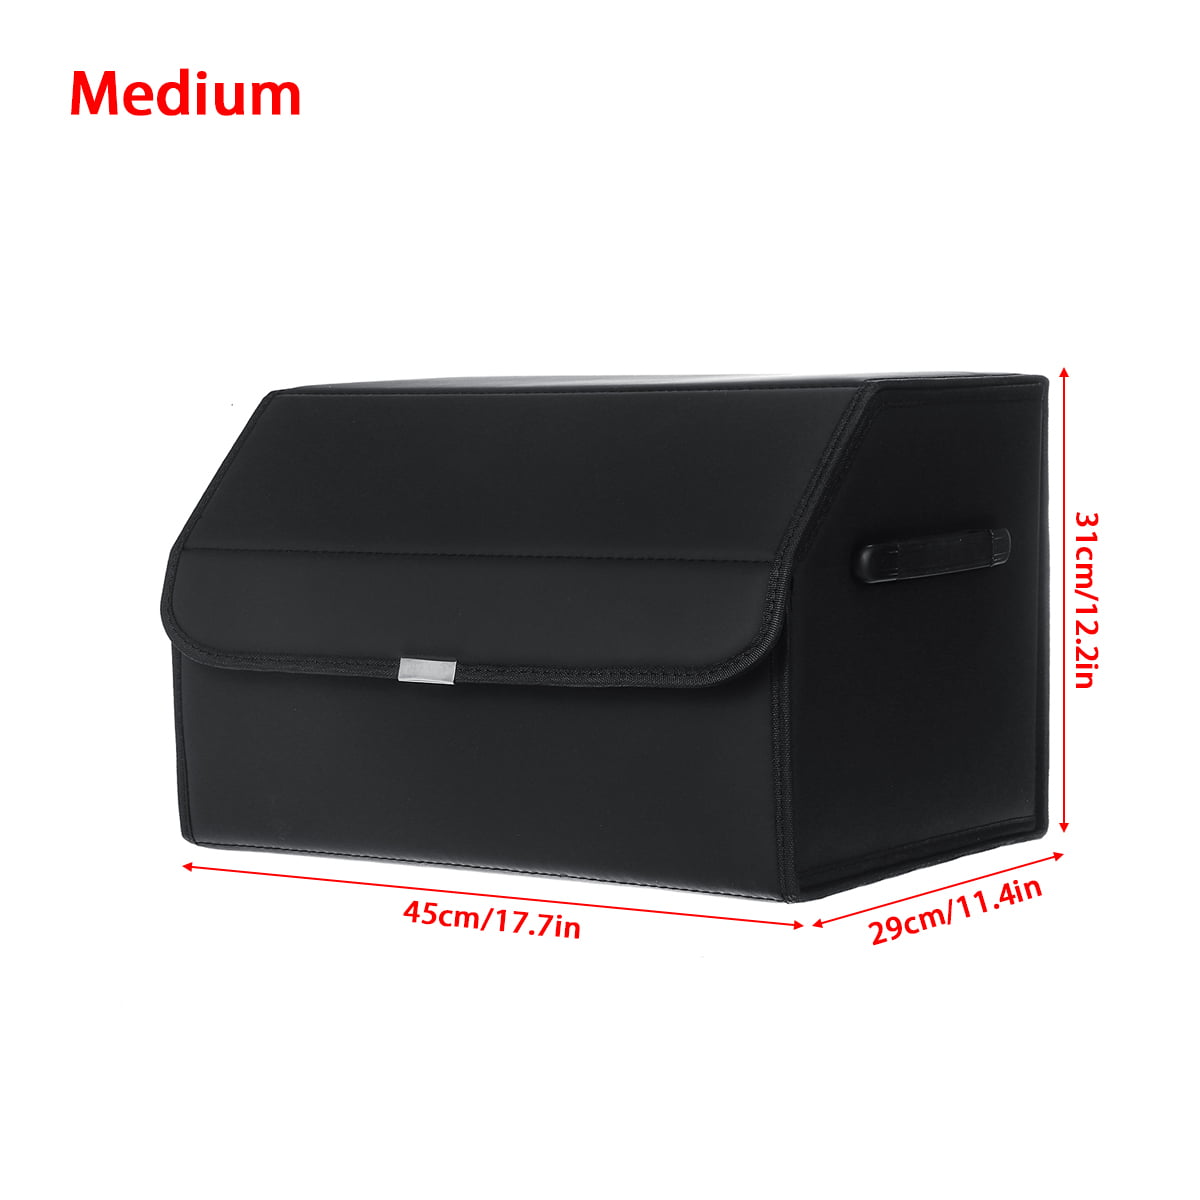 Stoneway Collapsible Car Trunk Leather Storage Organizer with Lid, Large  Multipurpose Car Storage Box Bin SUV, Van, Cargo Carrier Caddy for Shopping